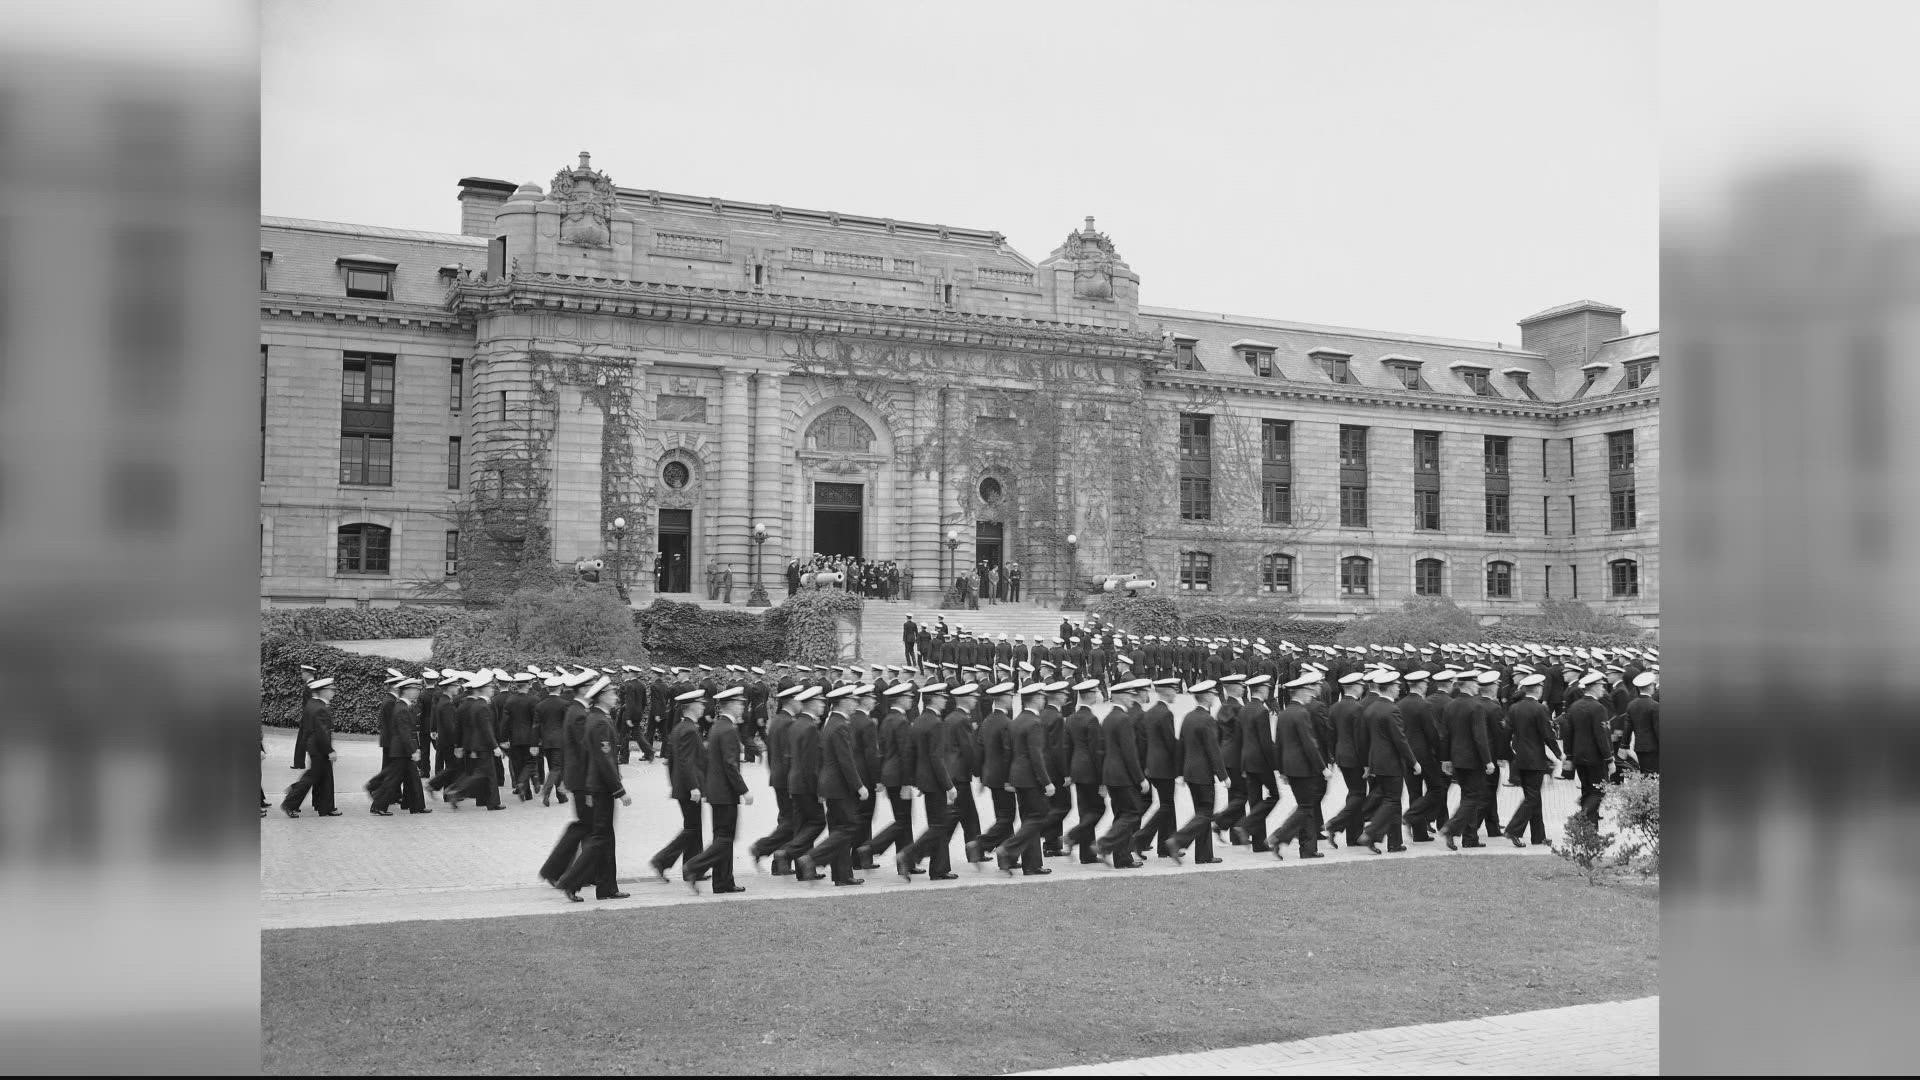 Adam Longo looks back at the very beginnings of a vital American military institution and why it got started in the first place